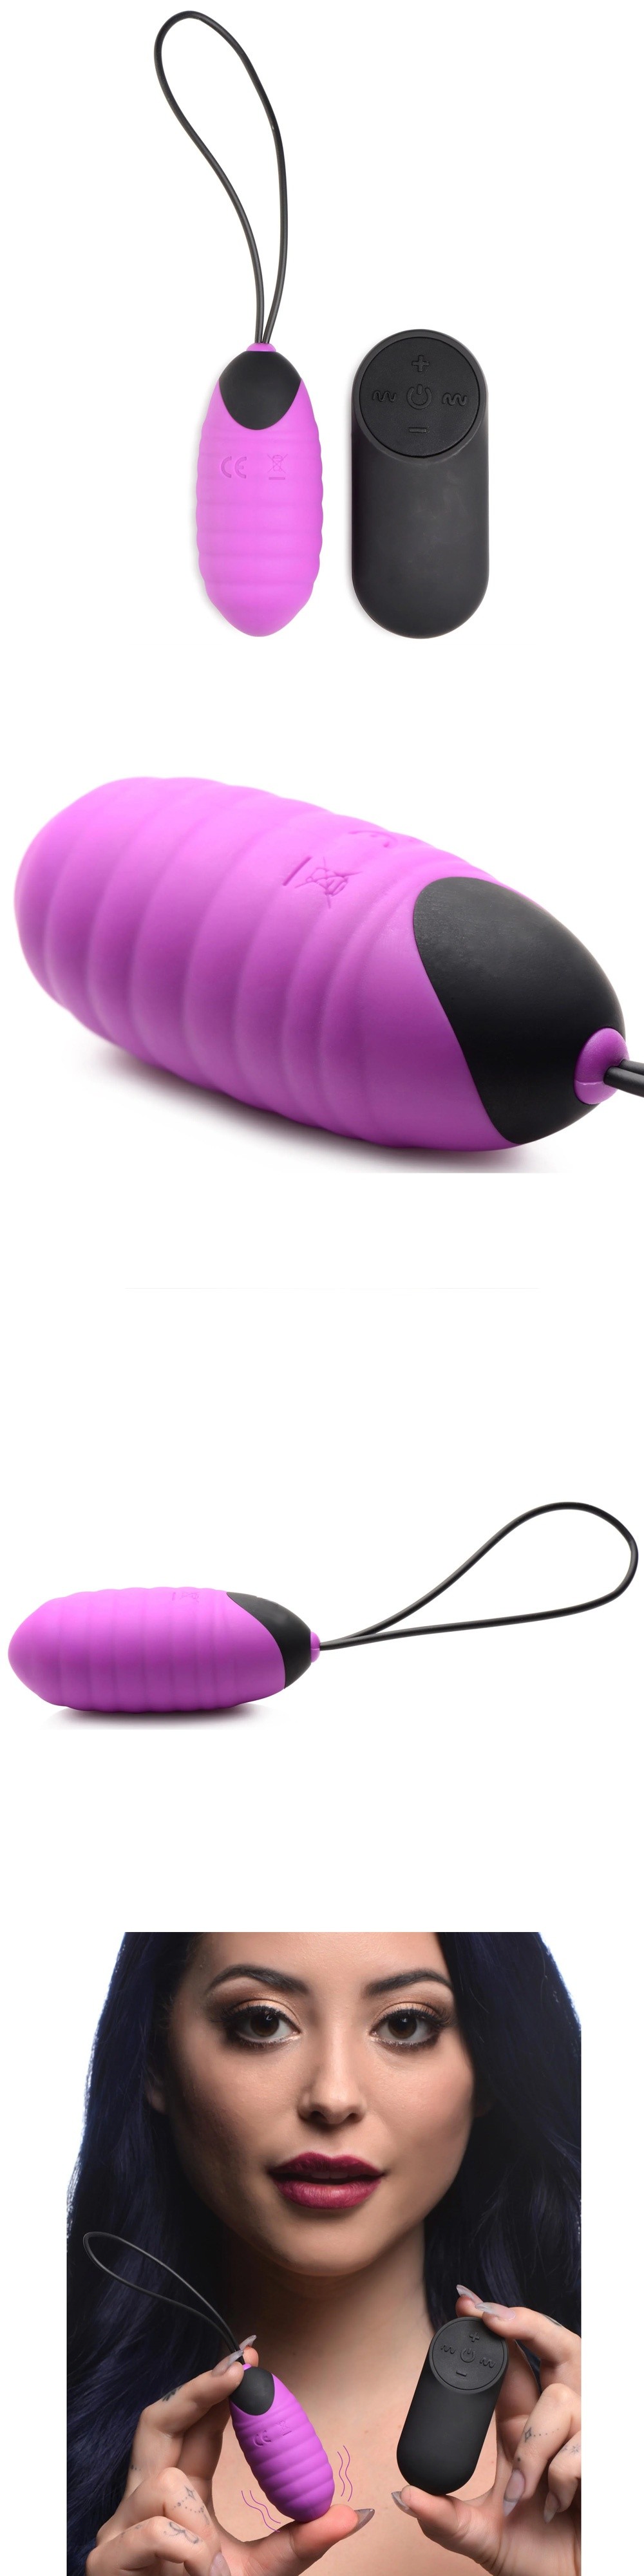 28X Ribbed Silicone Egg Clit Vibrator with Remote